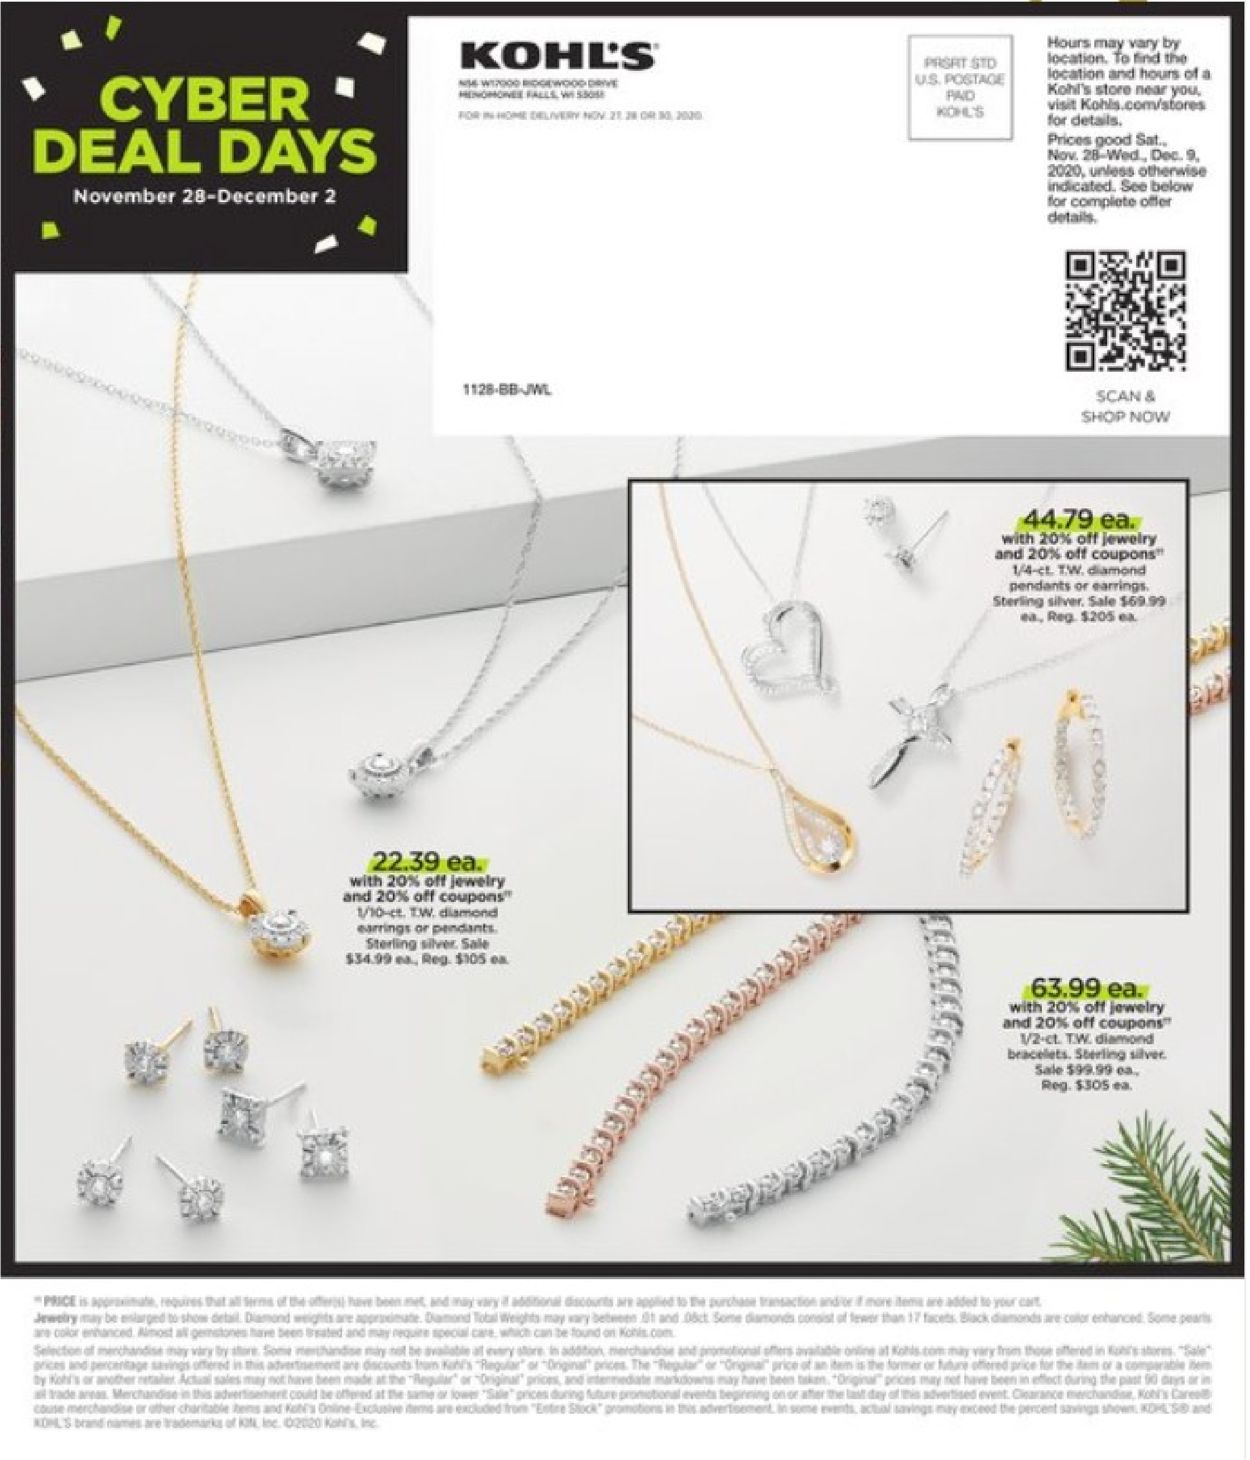 Catalogue Kohl's from 11/30/2020